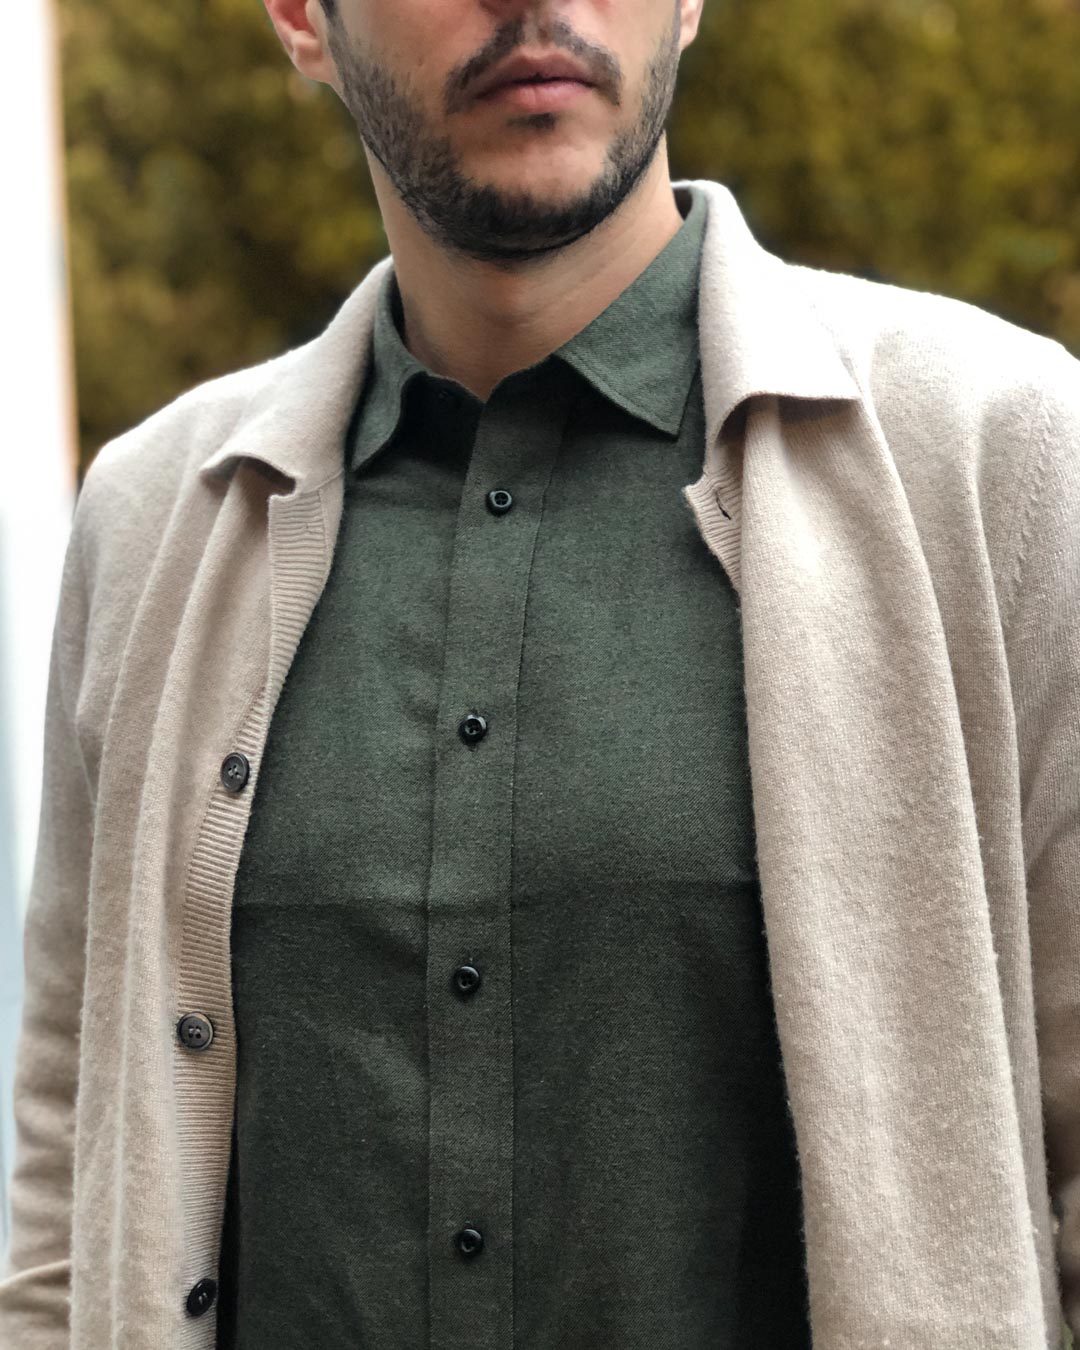 MatchU Tailor Shirt Review - Olive Green Flannel Pic 2